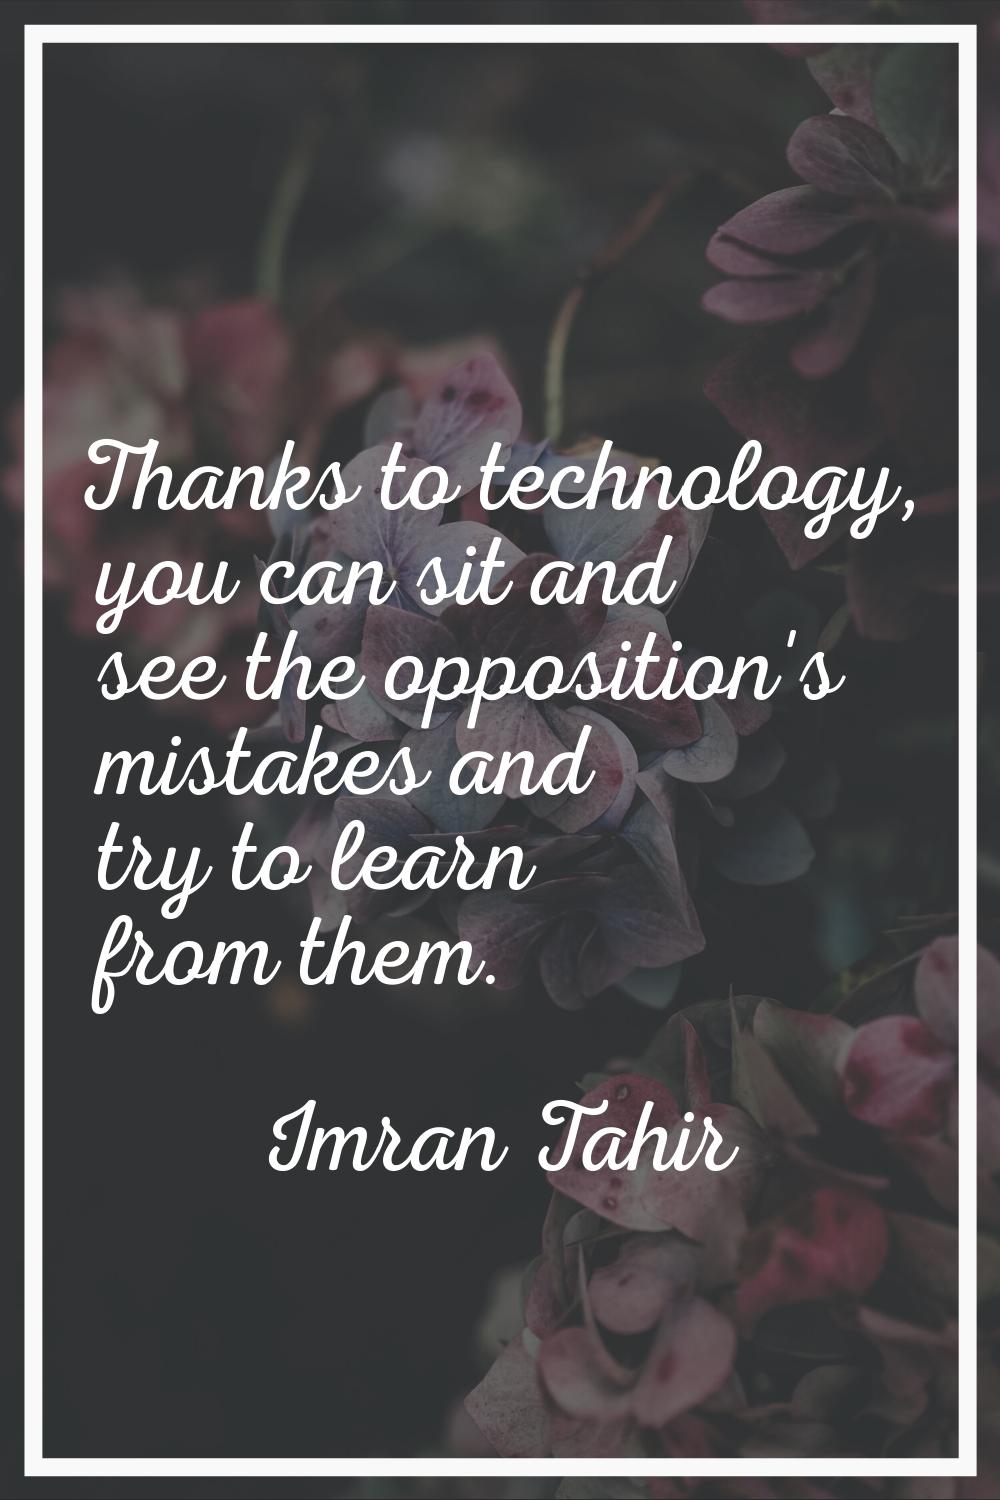 Thanks to technology, you can sit and see the opposition's mistakes and try to learn from them.